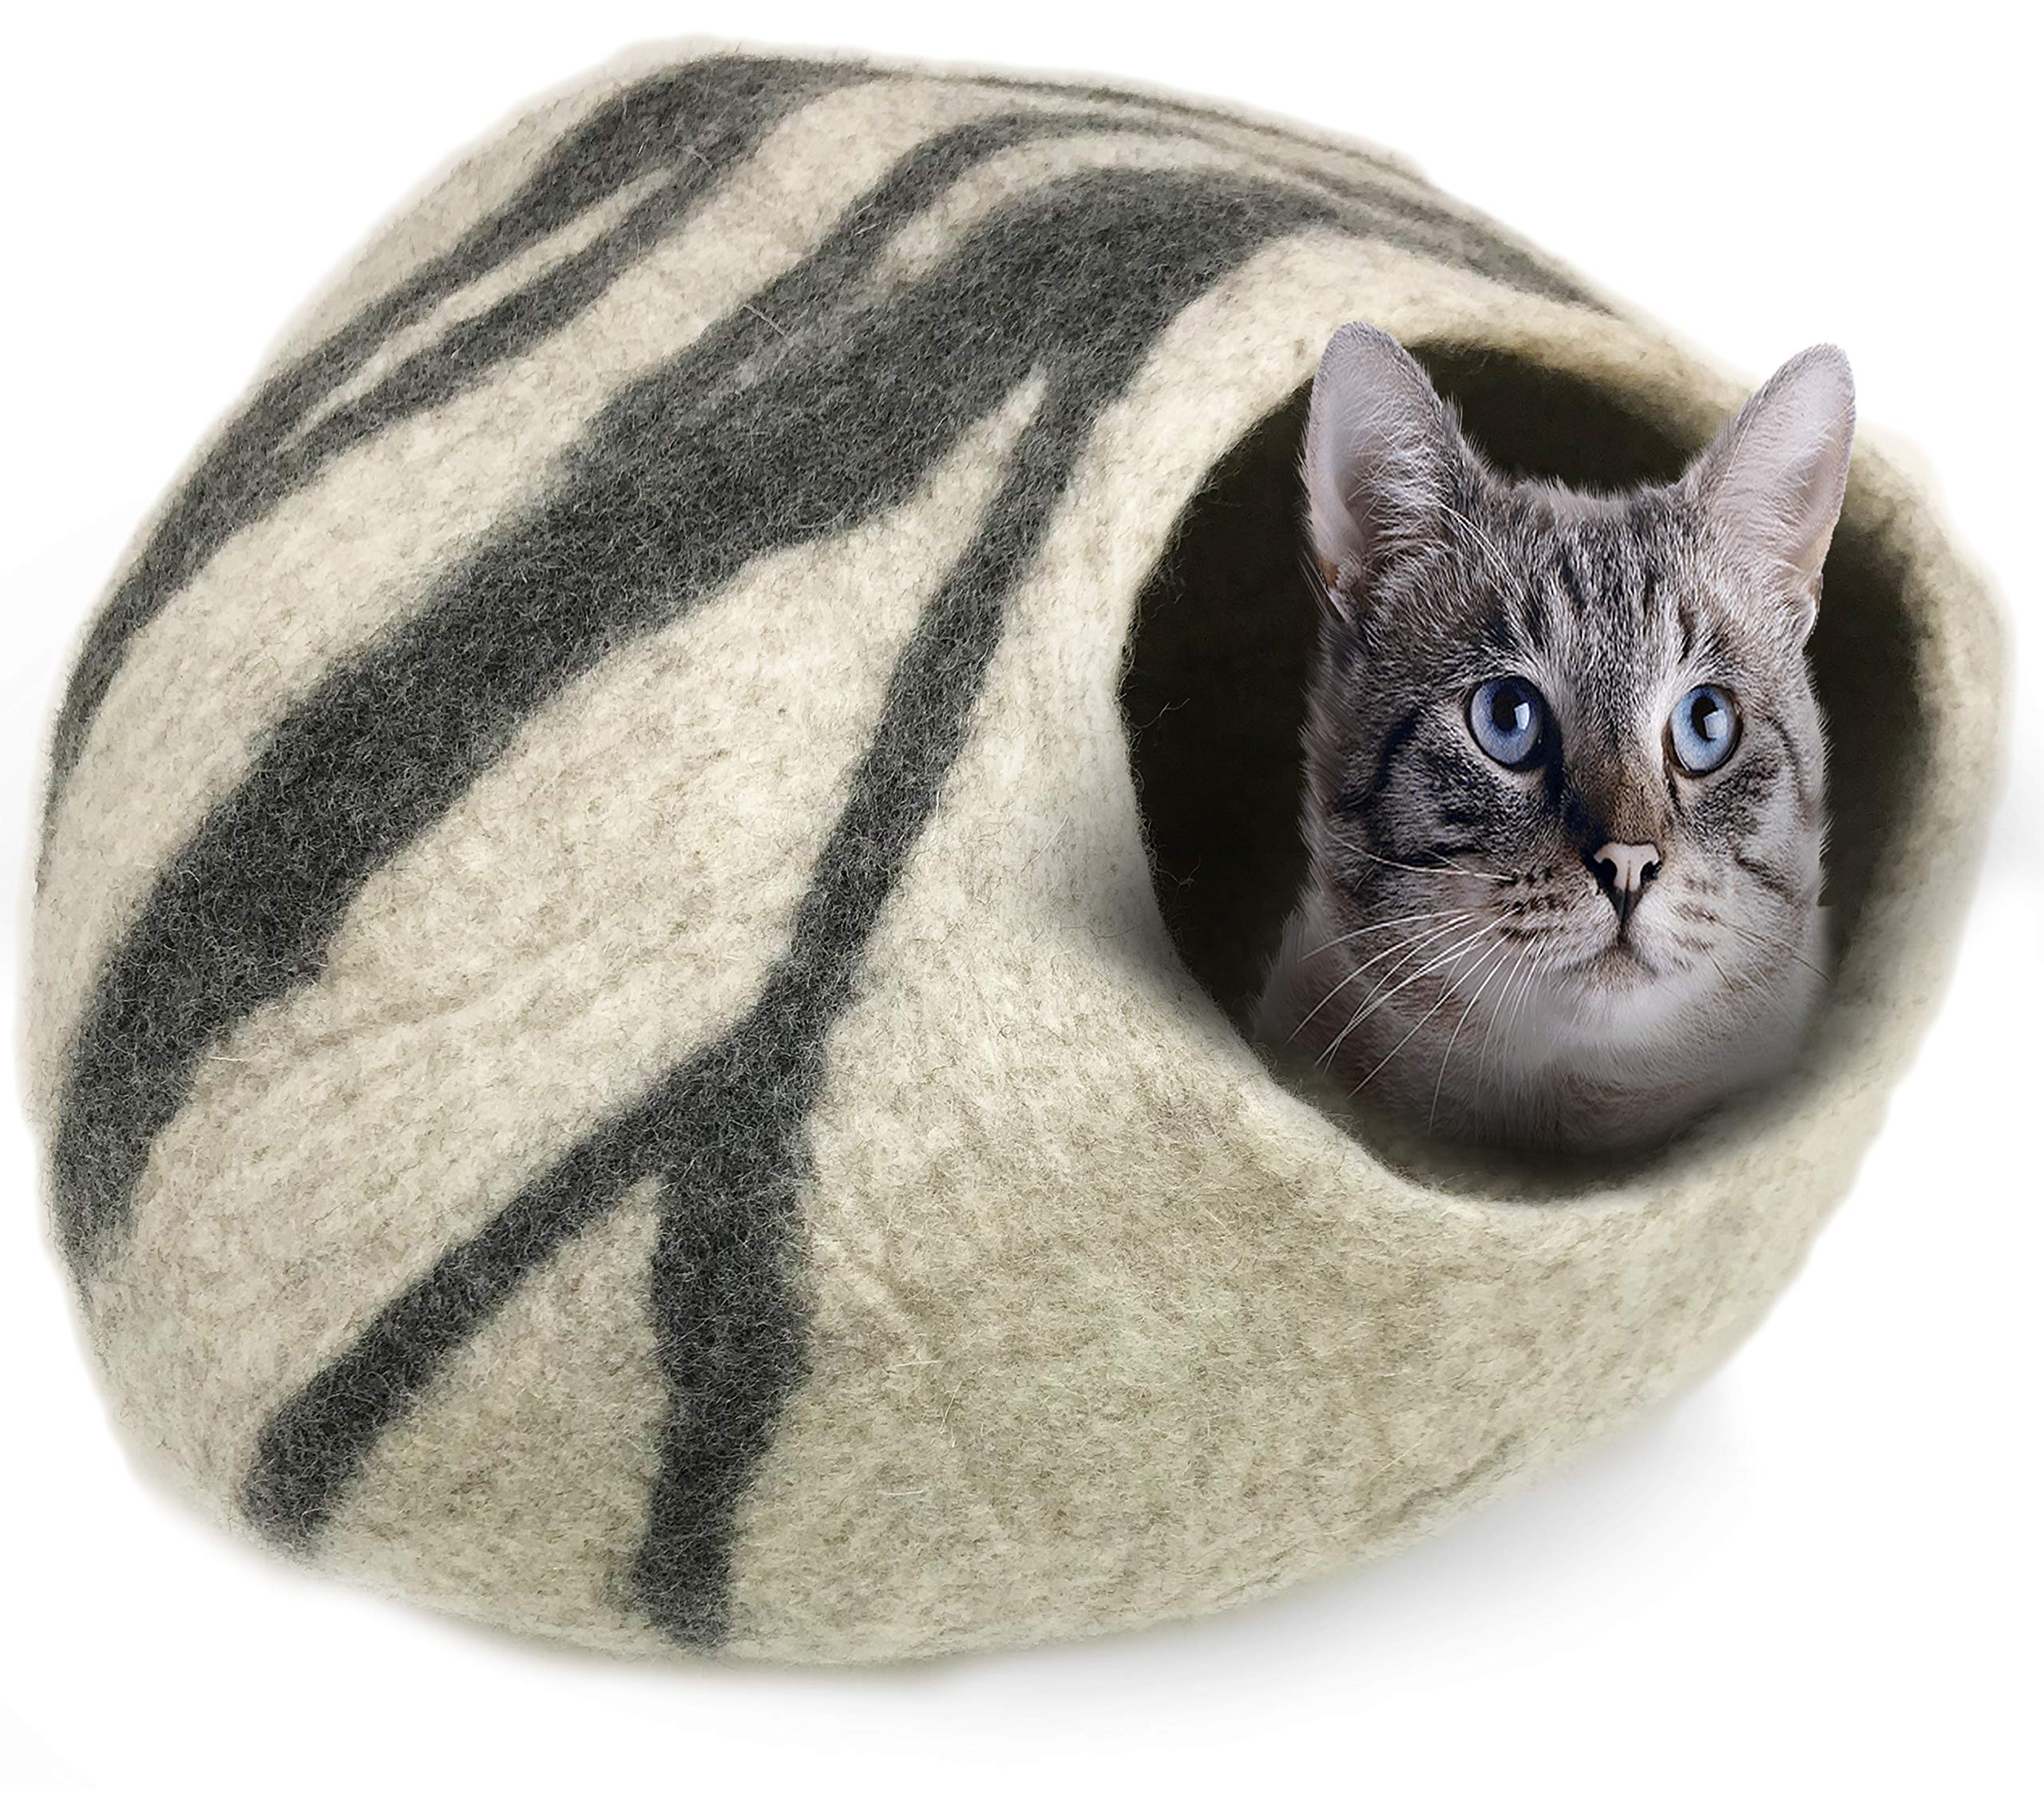 100% Natural Wool Large Cat Cave - Handmade Premium Shaped Felt - Makes Great Covered Cat House and Bed for Kitty. for Indoor Cozy Hideaway. Large Pod Soft Hooded Bed Area.  - Like New